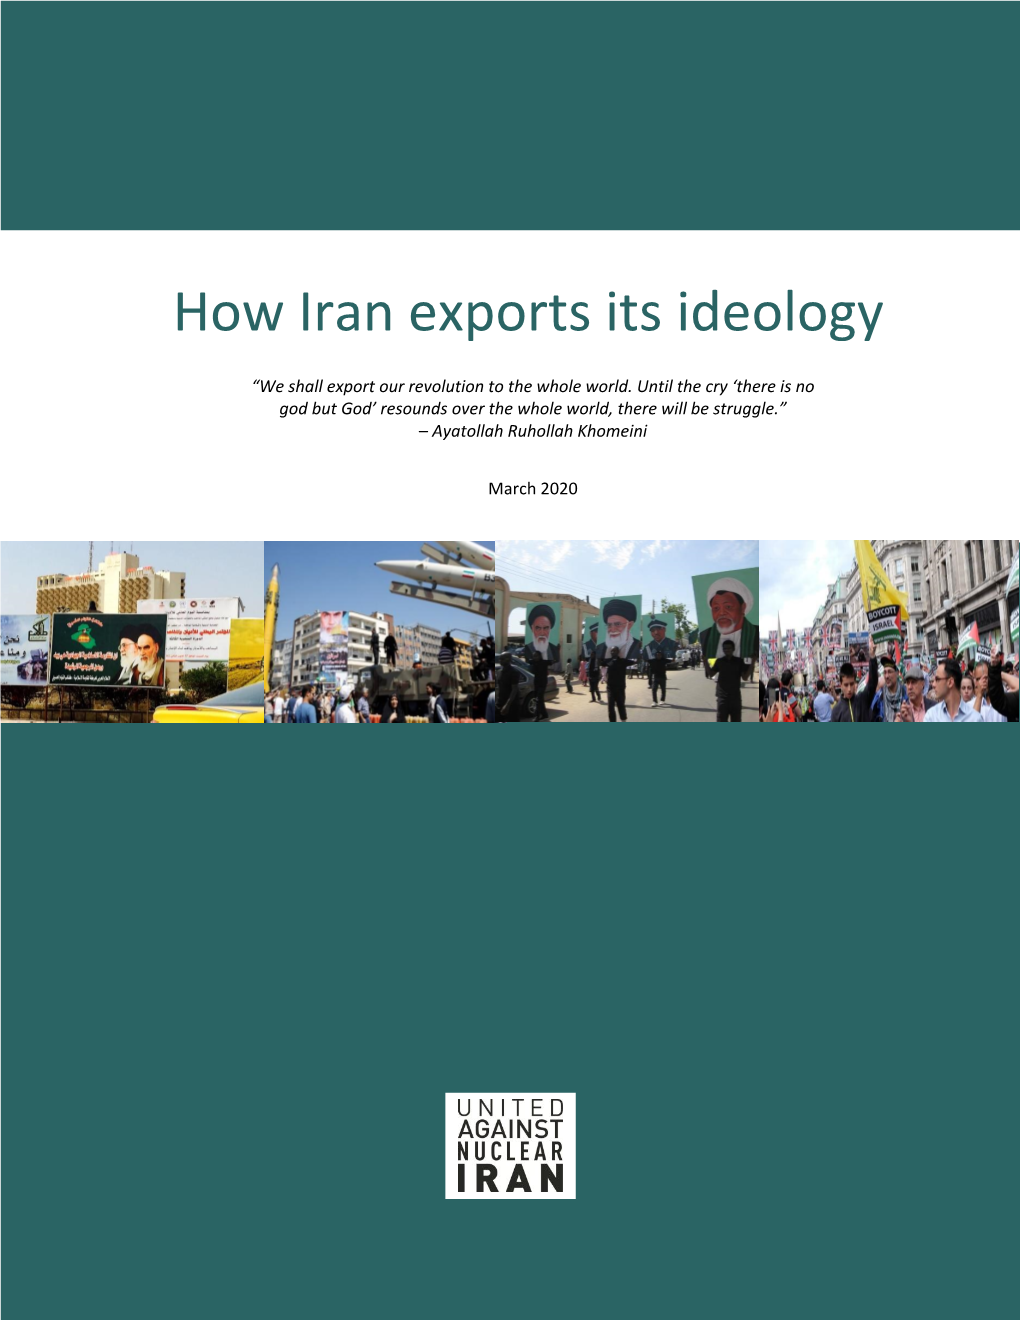 How Iran Exports Its Ideology